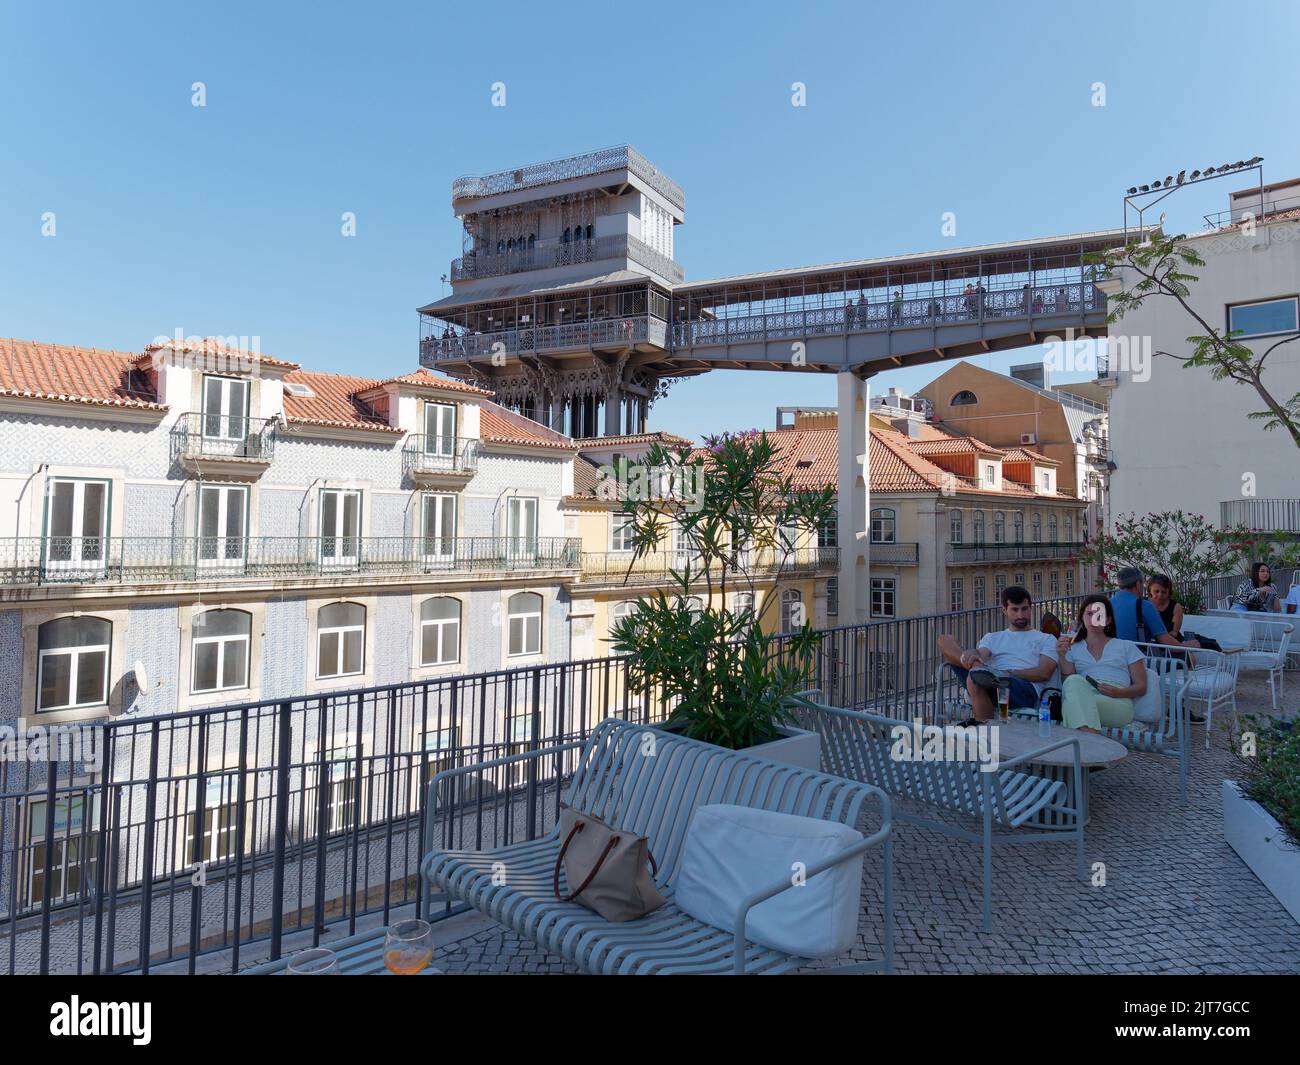 Santa Justa Lift and viewpoint with surrounding buildings in Lisbon, Portugal. Restaurant in the foreground. Stock Photo